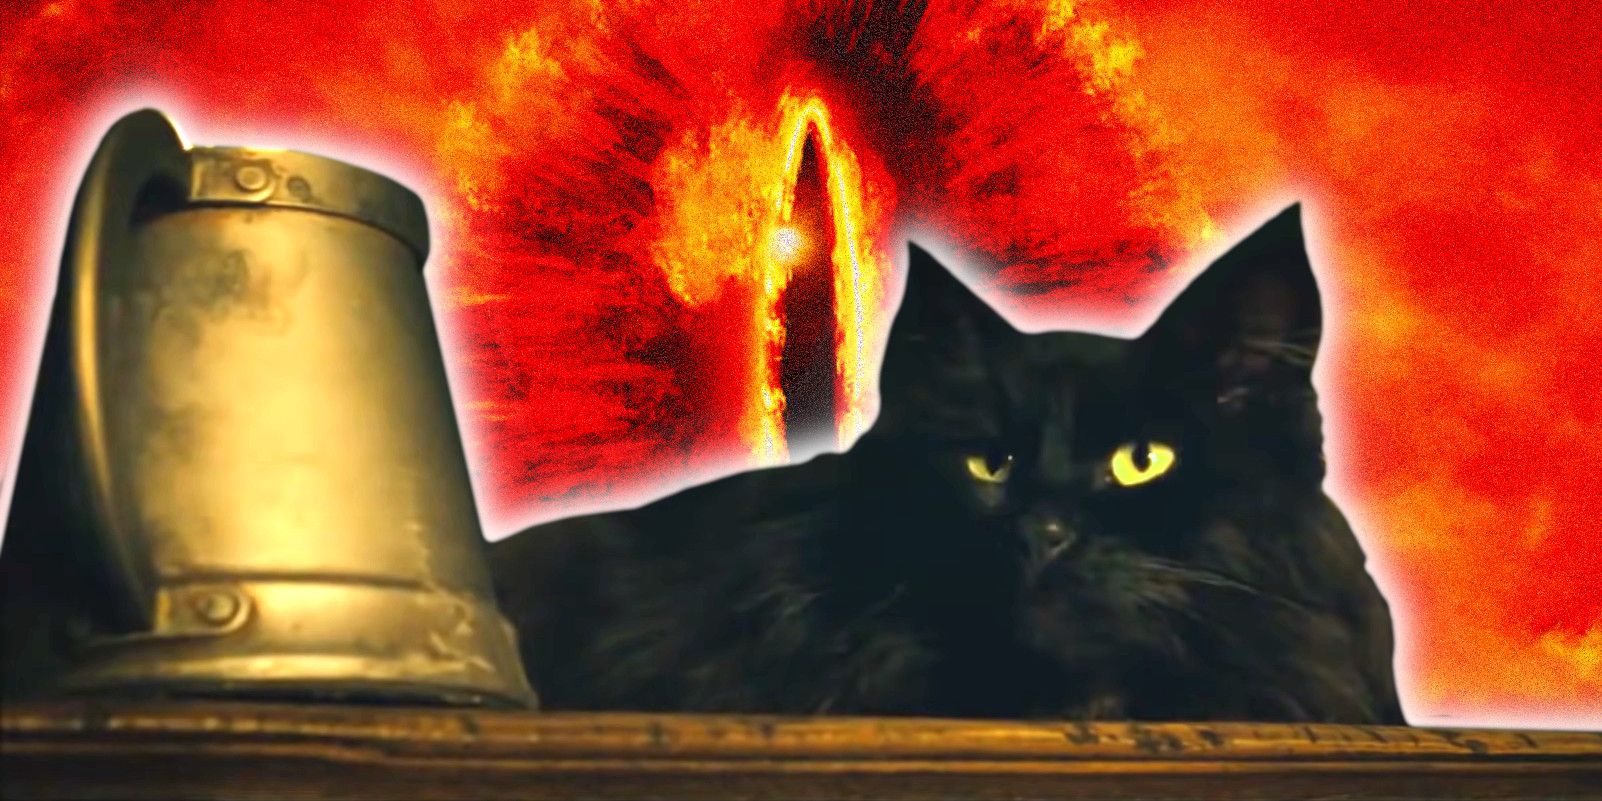 The cat in The Prancing Pony in front of the Eye of Sauron from The Lord of the Rings